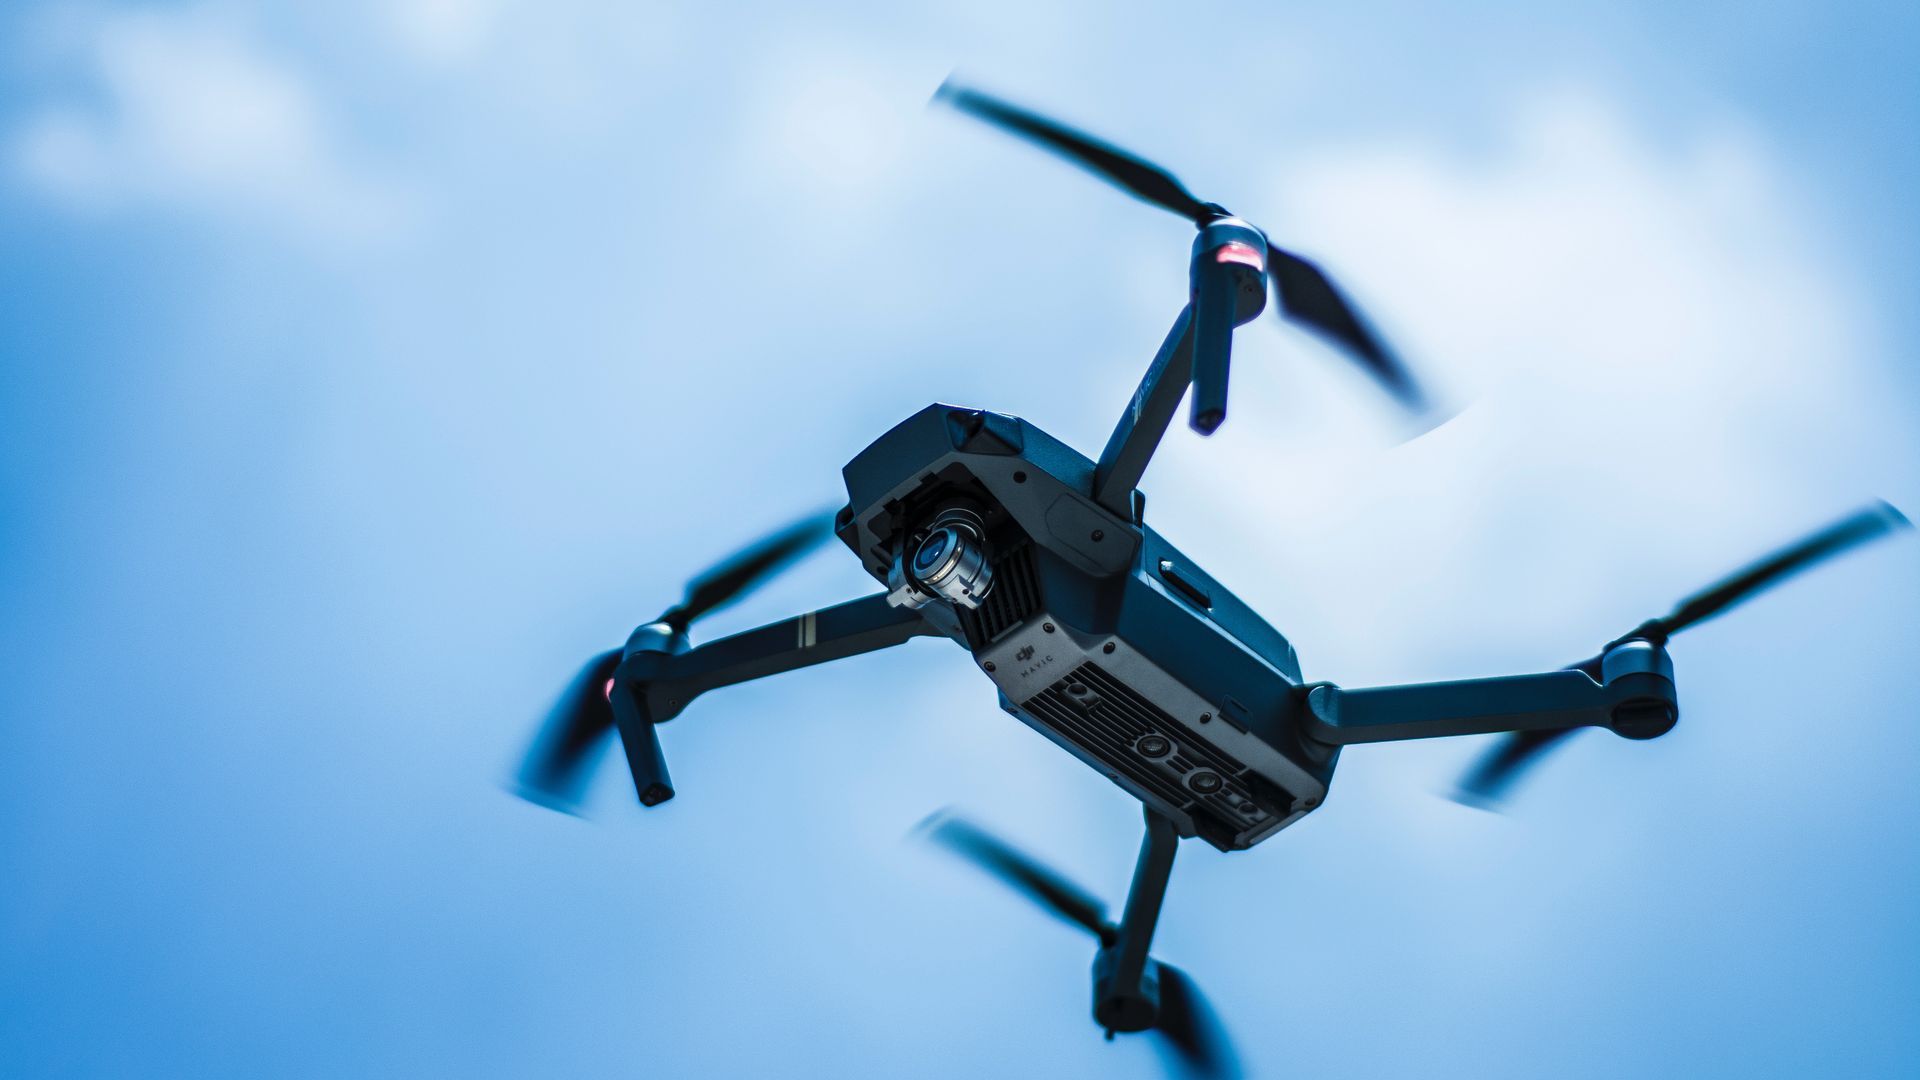 Gray Quadcopter Drone in the Sky Wallpaper